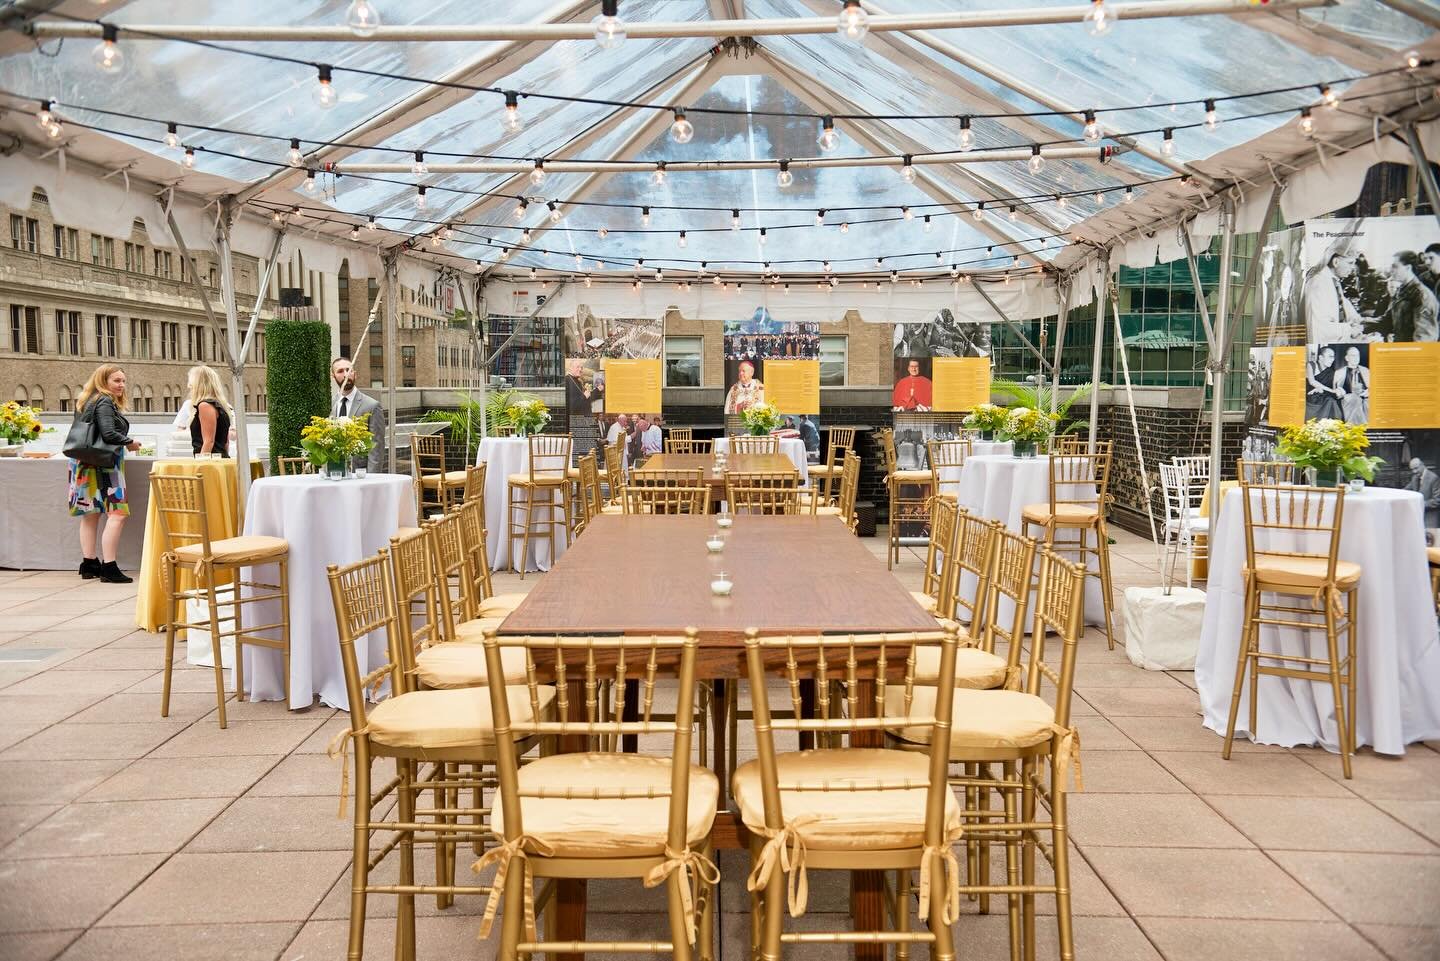 We won&rsquo;t let a little rain upset your outdoor event. ✨

With  NYFF&rsquo;s elevated tents, you have a beautiful setting and a weather backup all in one. Perfect for outdoor summer gatherings from proms, to bar/bat mitzvahs, to weddings! 

#NYFF